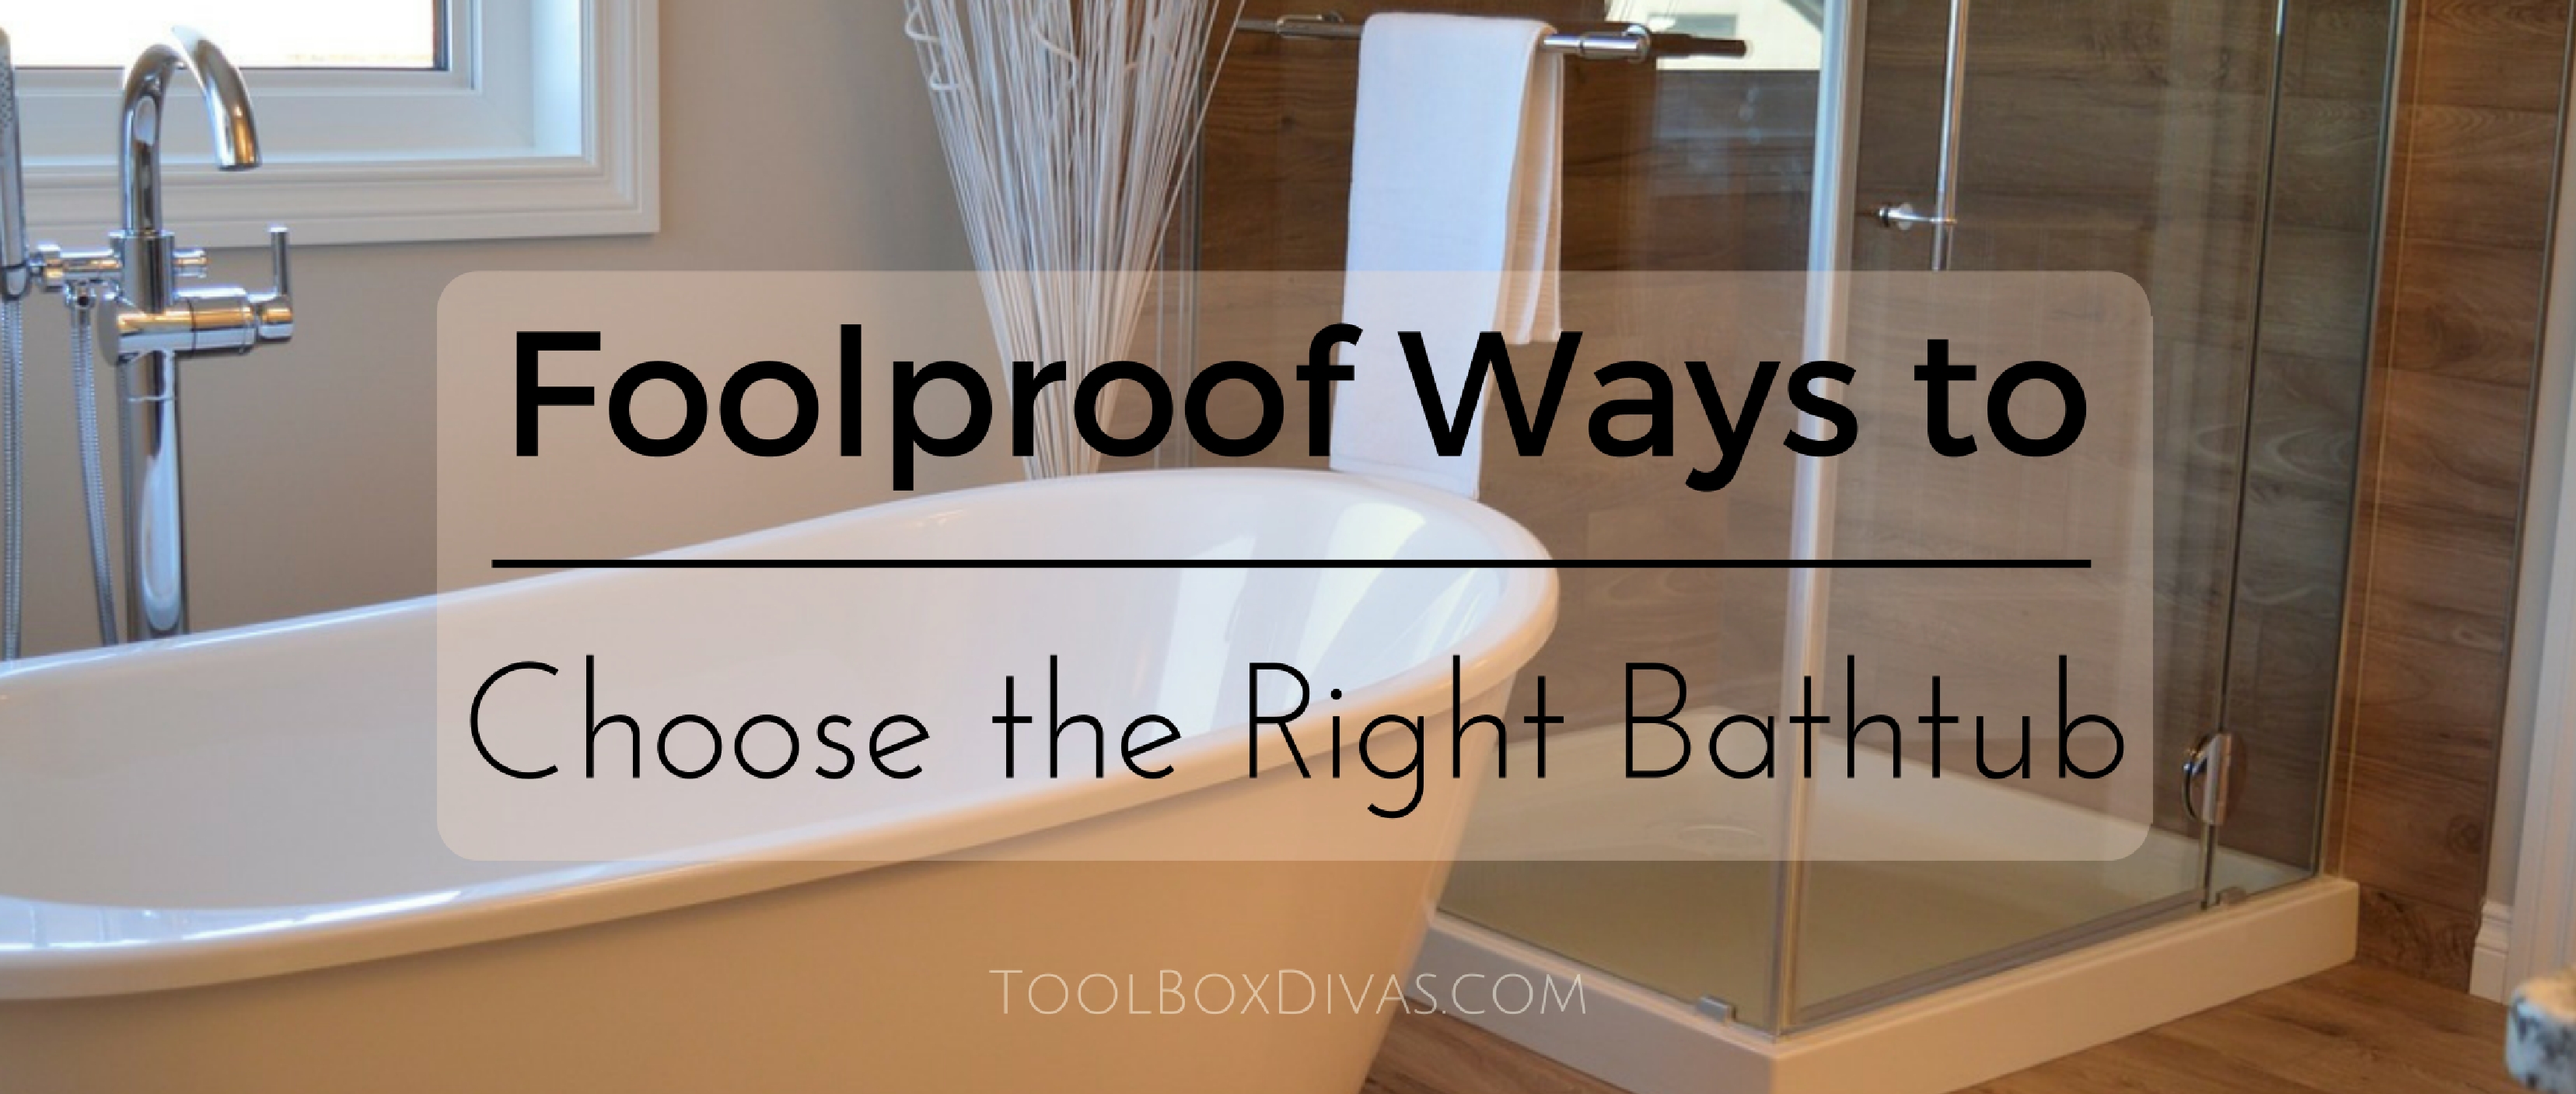 Foolproof Ways to Choose the Right Bathtub